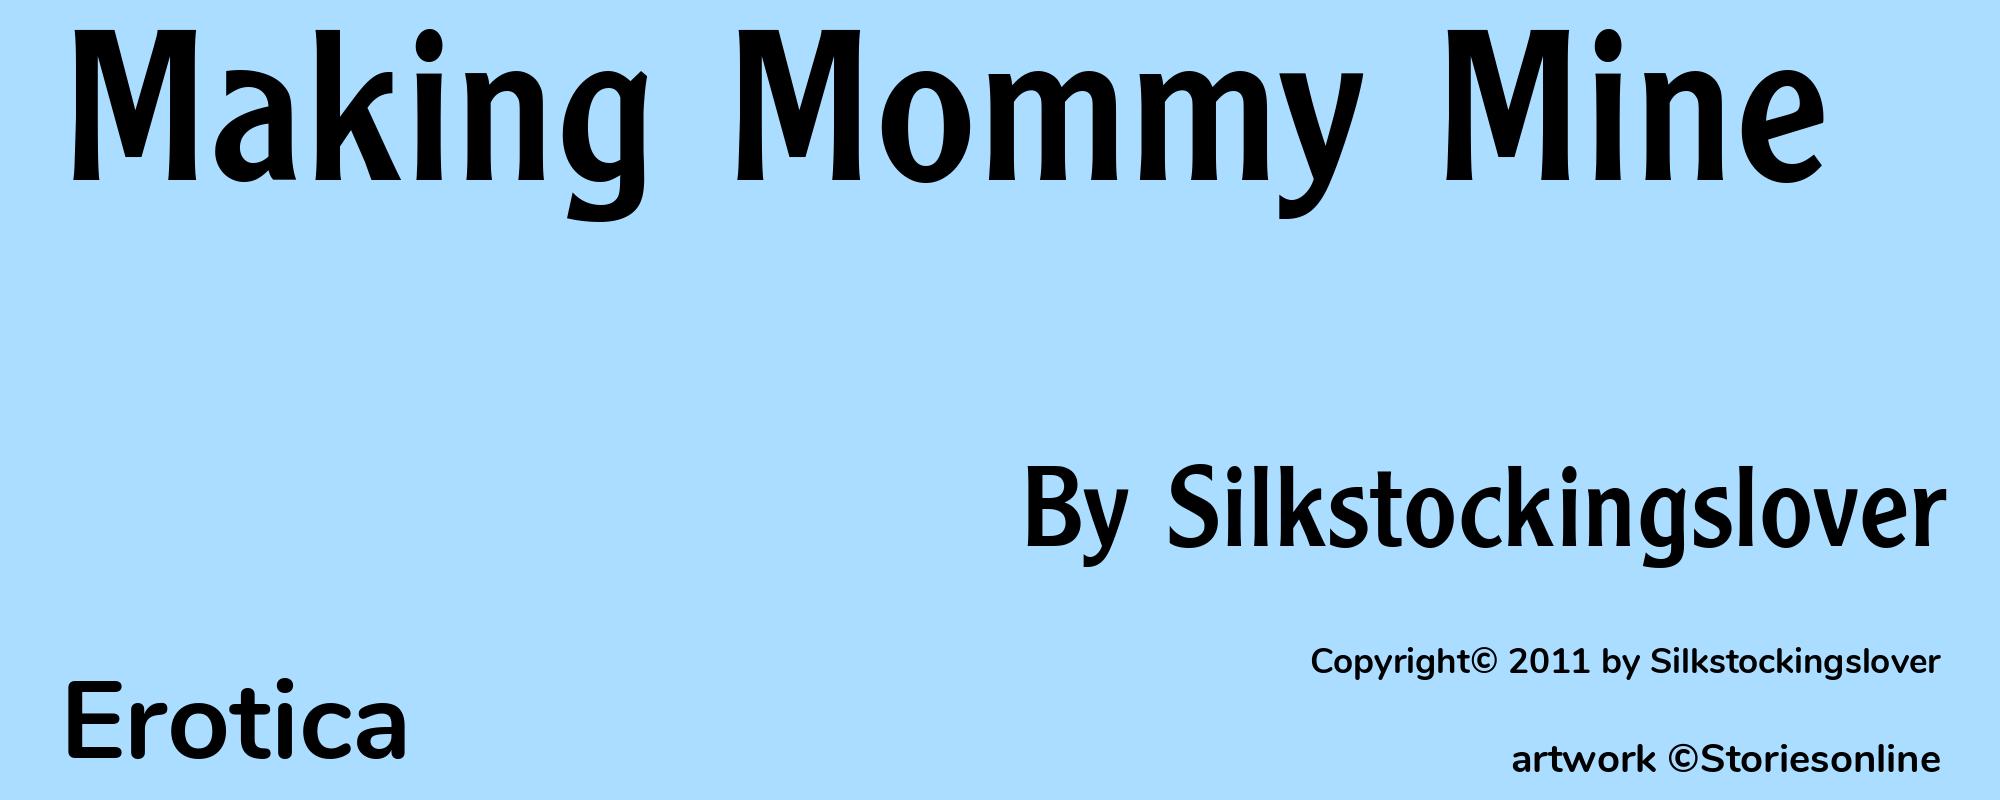 Making Mommy Mine - Cover